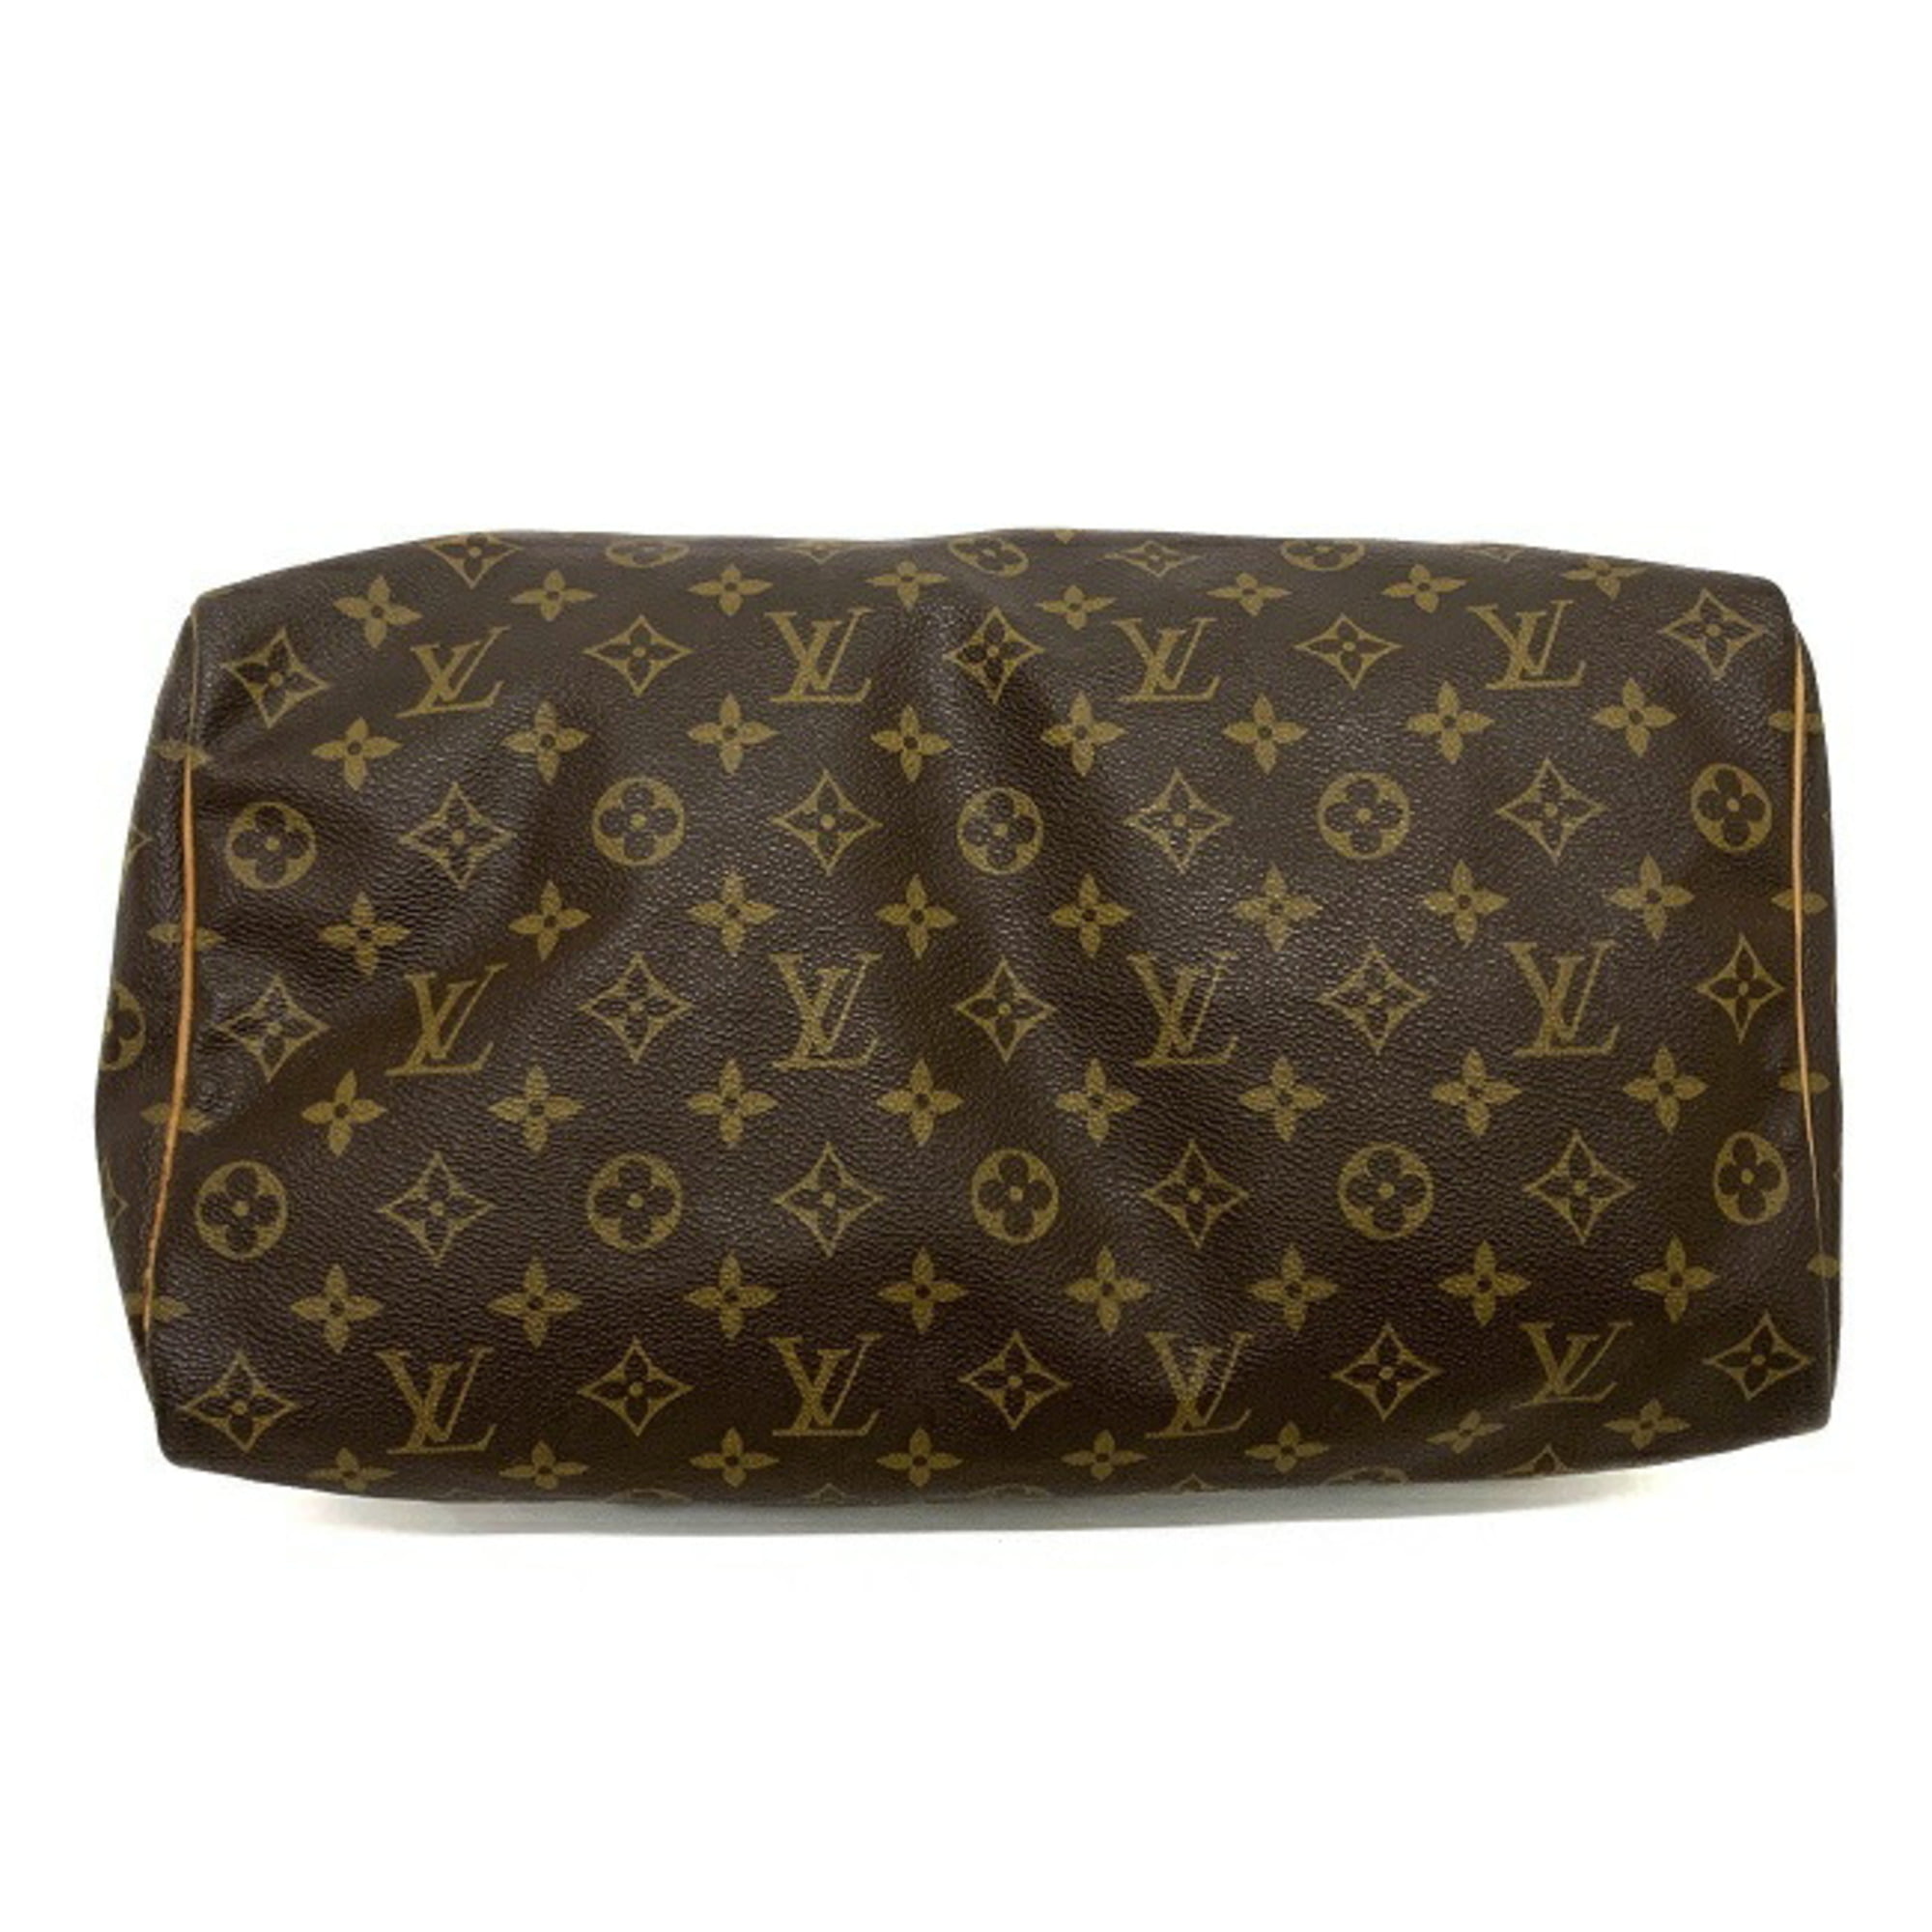 Sold at Auction: AUTHENTIC LOUIS VUITTON SPEEDY 35 MONOGRAＭOUFLAGE CANVAS,  LEATHER HAND BAG